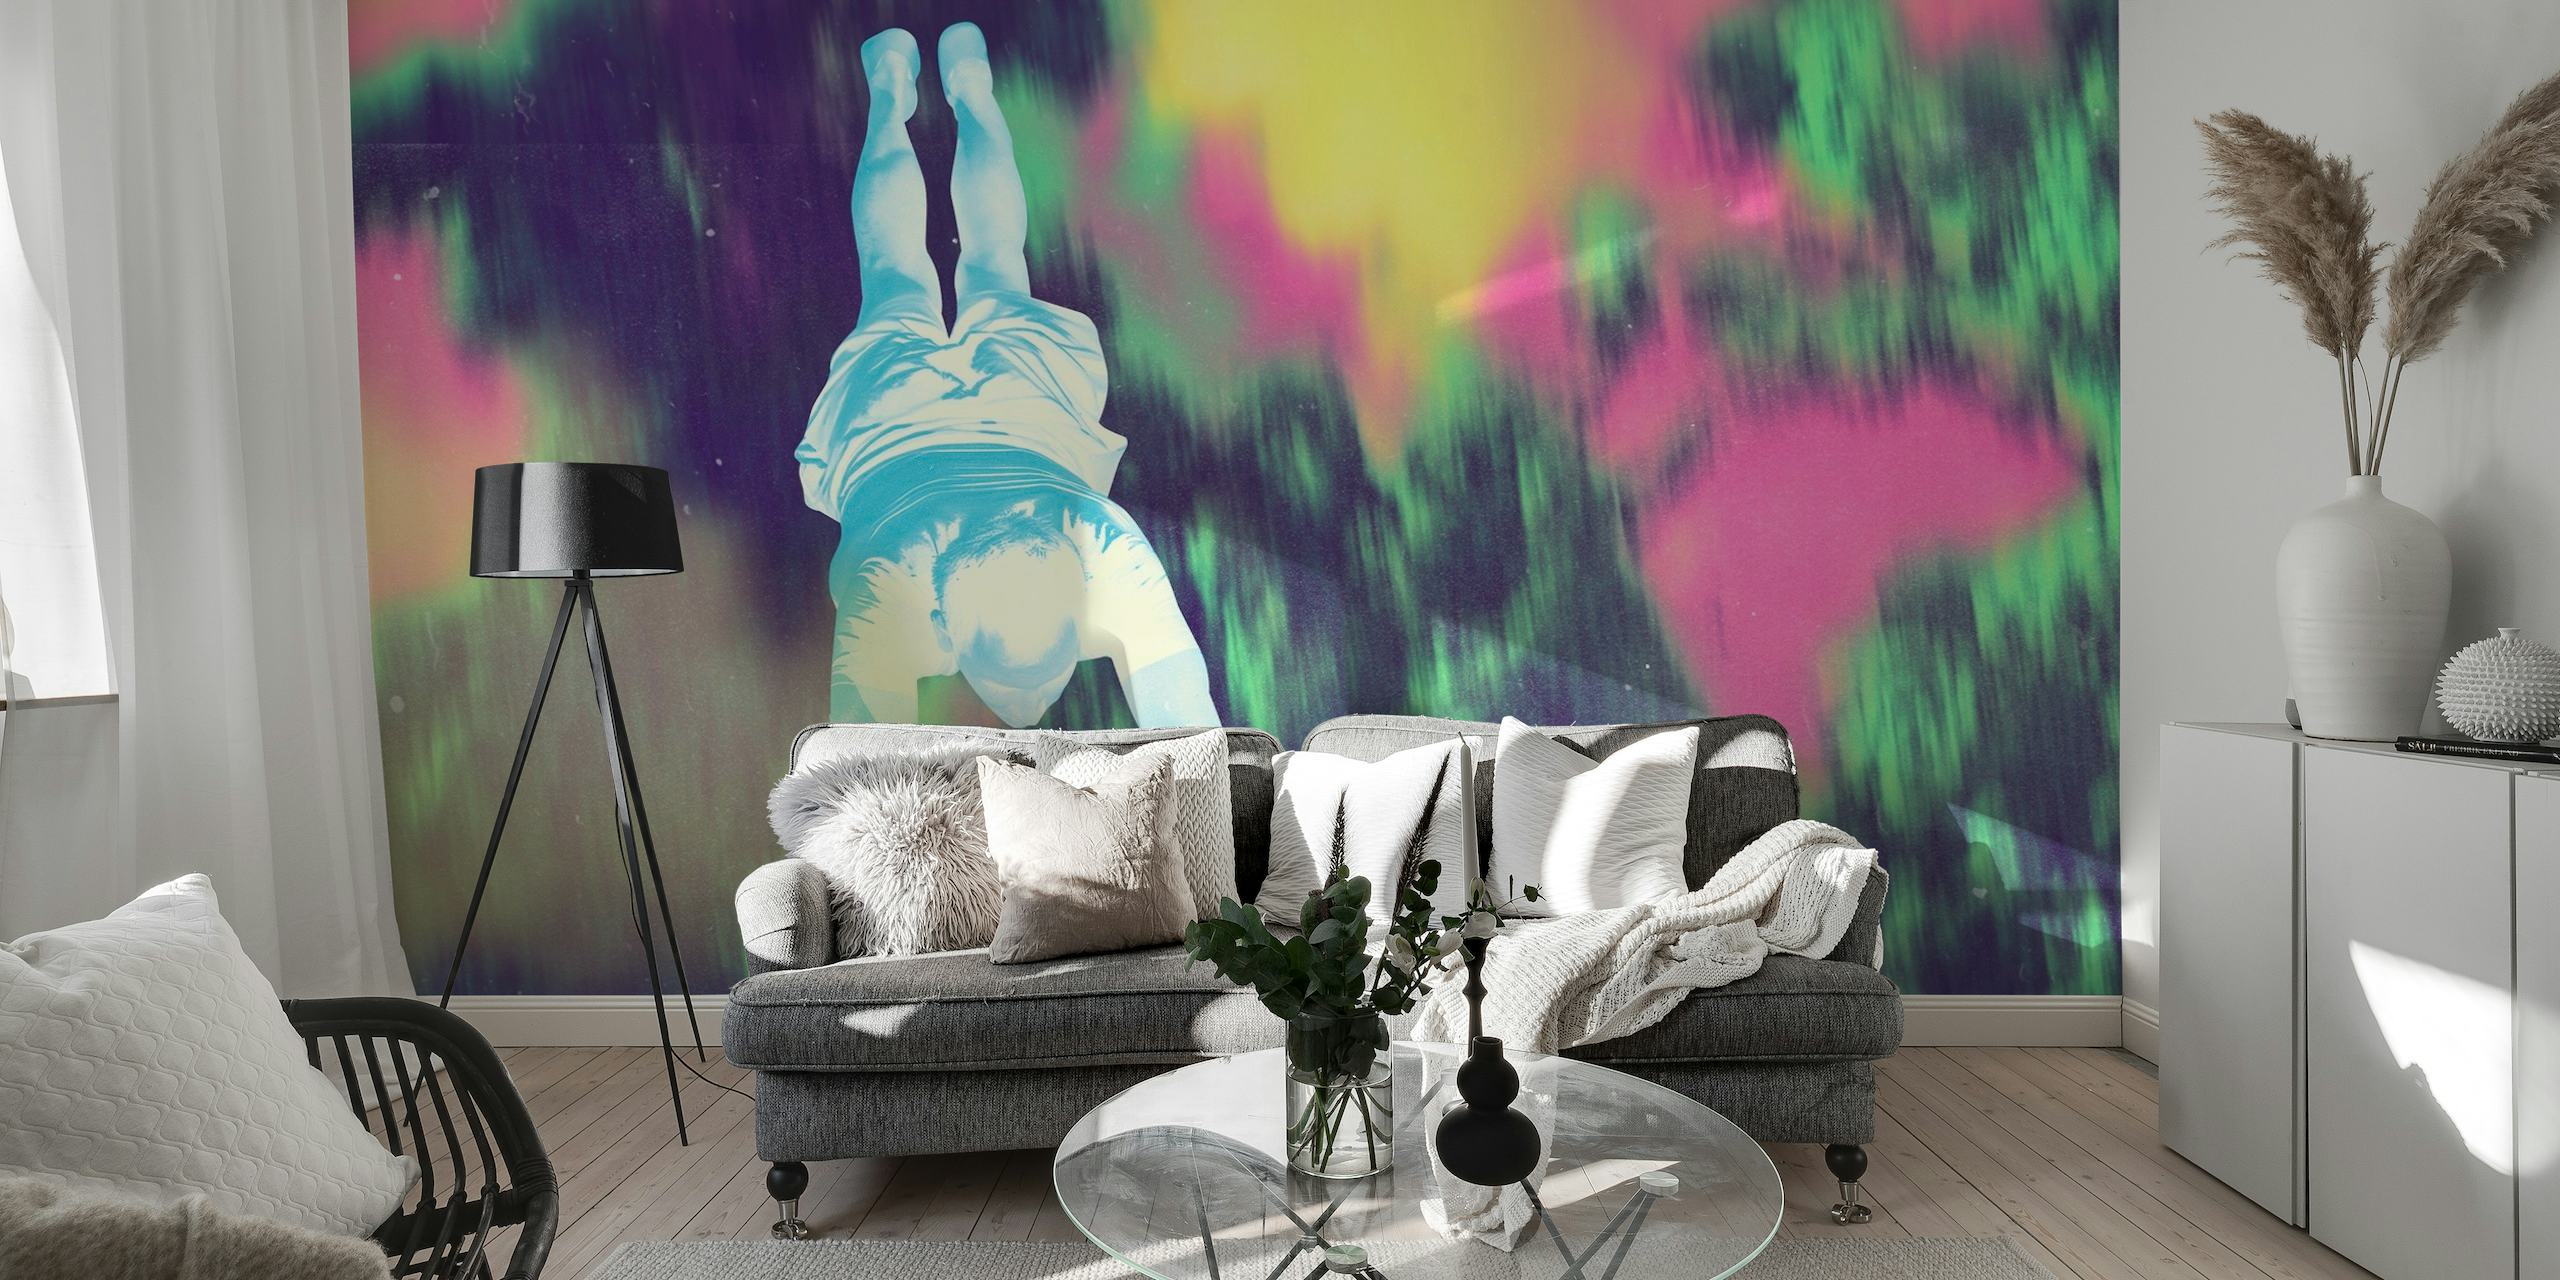 Abstract pop art style mural featuring a colorful, grungy background with a central figure symbolizing freedom.